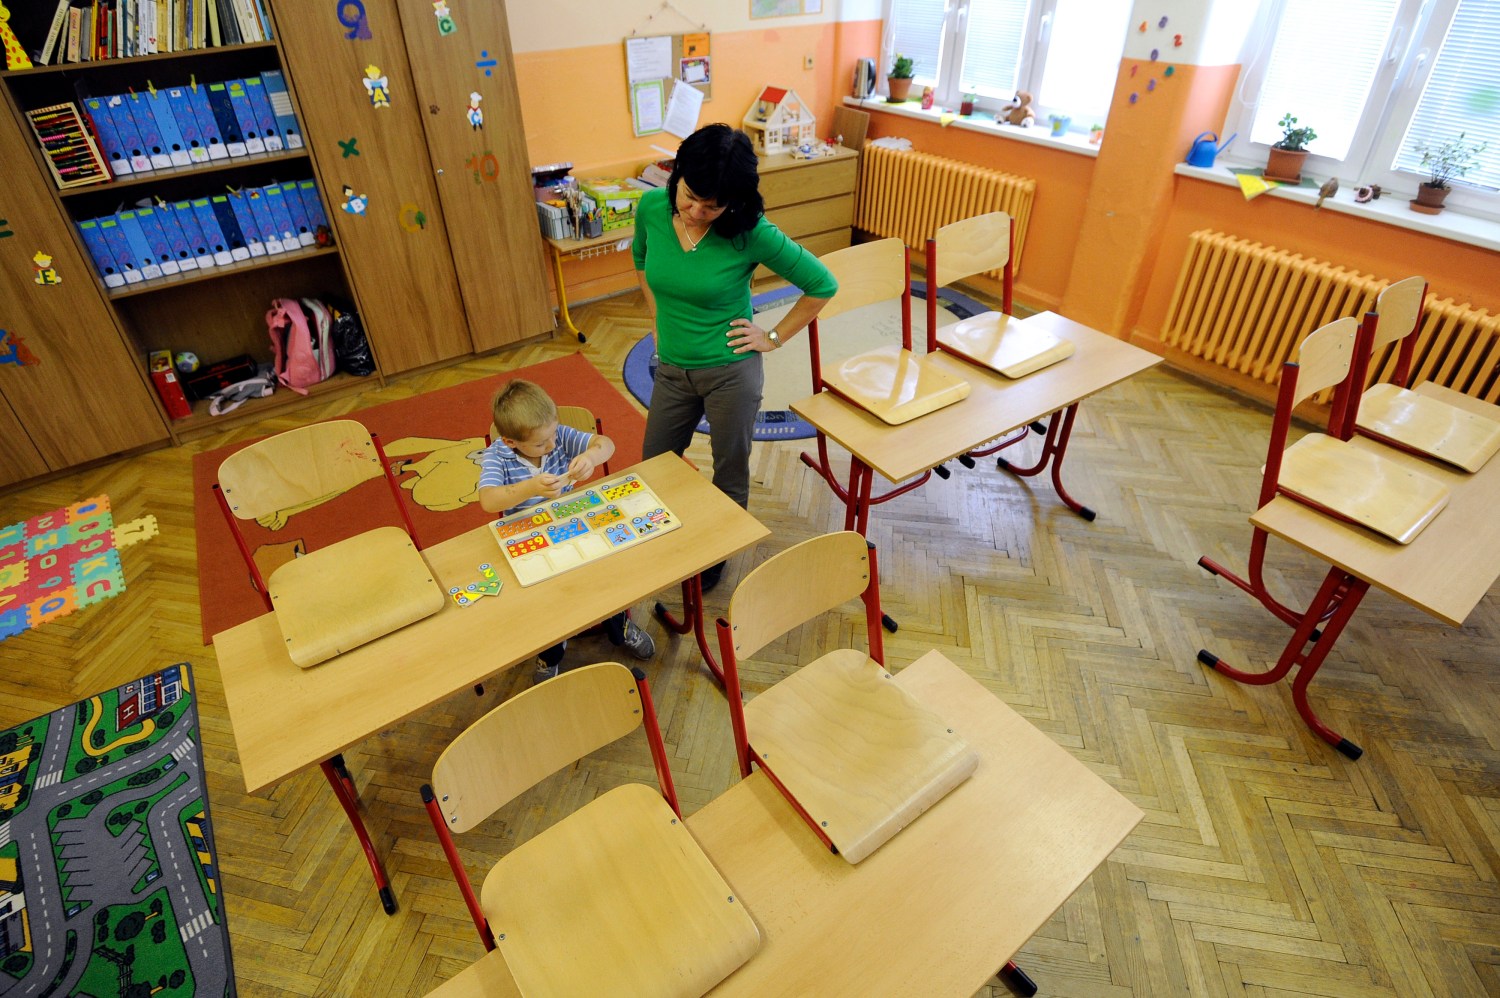 Kindergarden student Misko (4) plays with puzzles next to a teacher and volunteer in an empty school, closed during a one-day strike by local teachers seeking higher salaries and better work conditions.